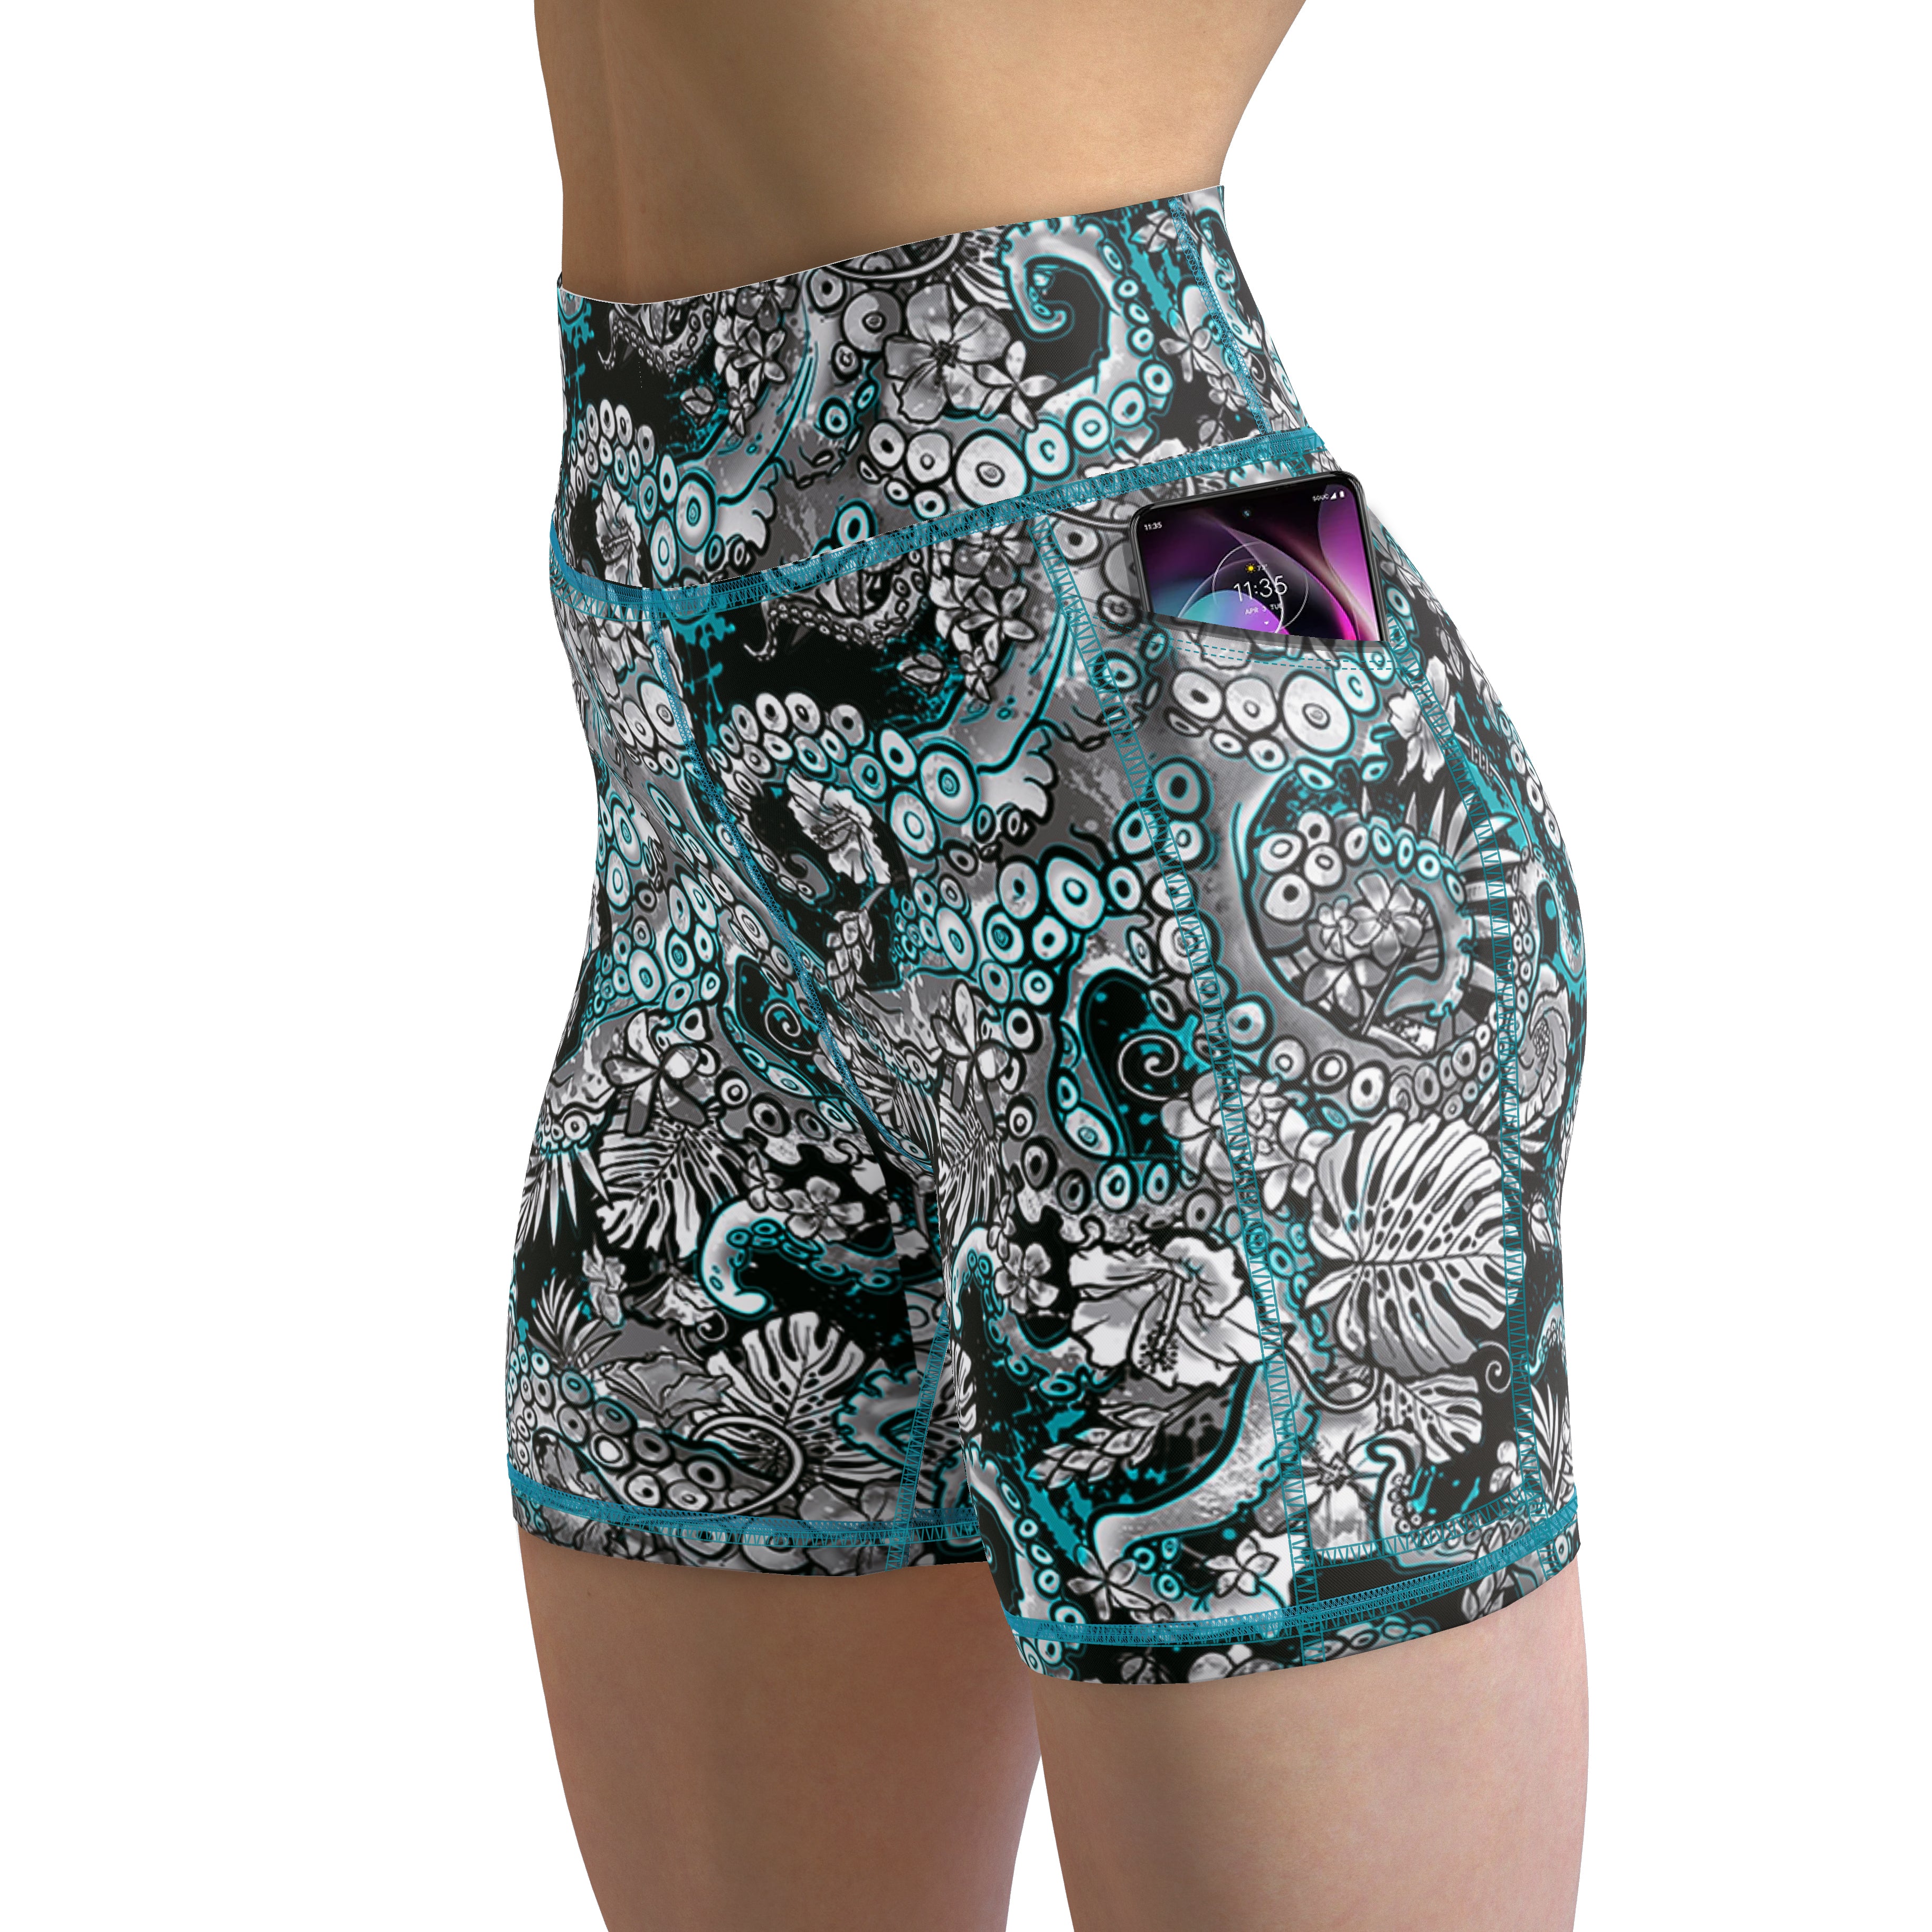 Eco-Friendly Octopus Shorts – Spacefish Army